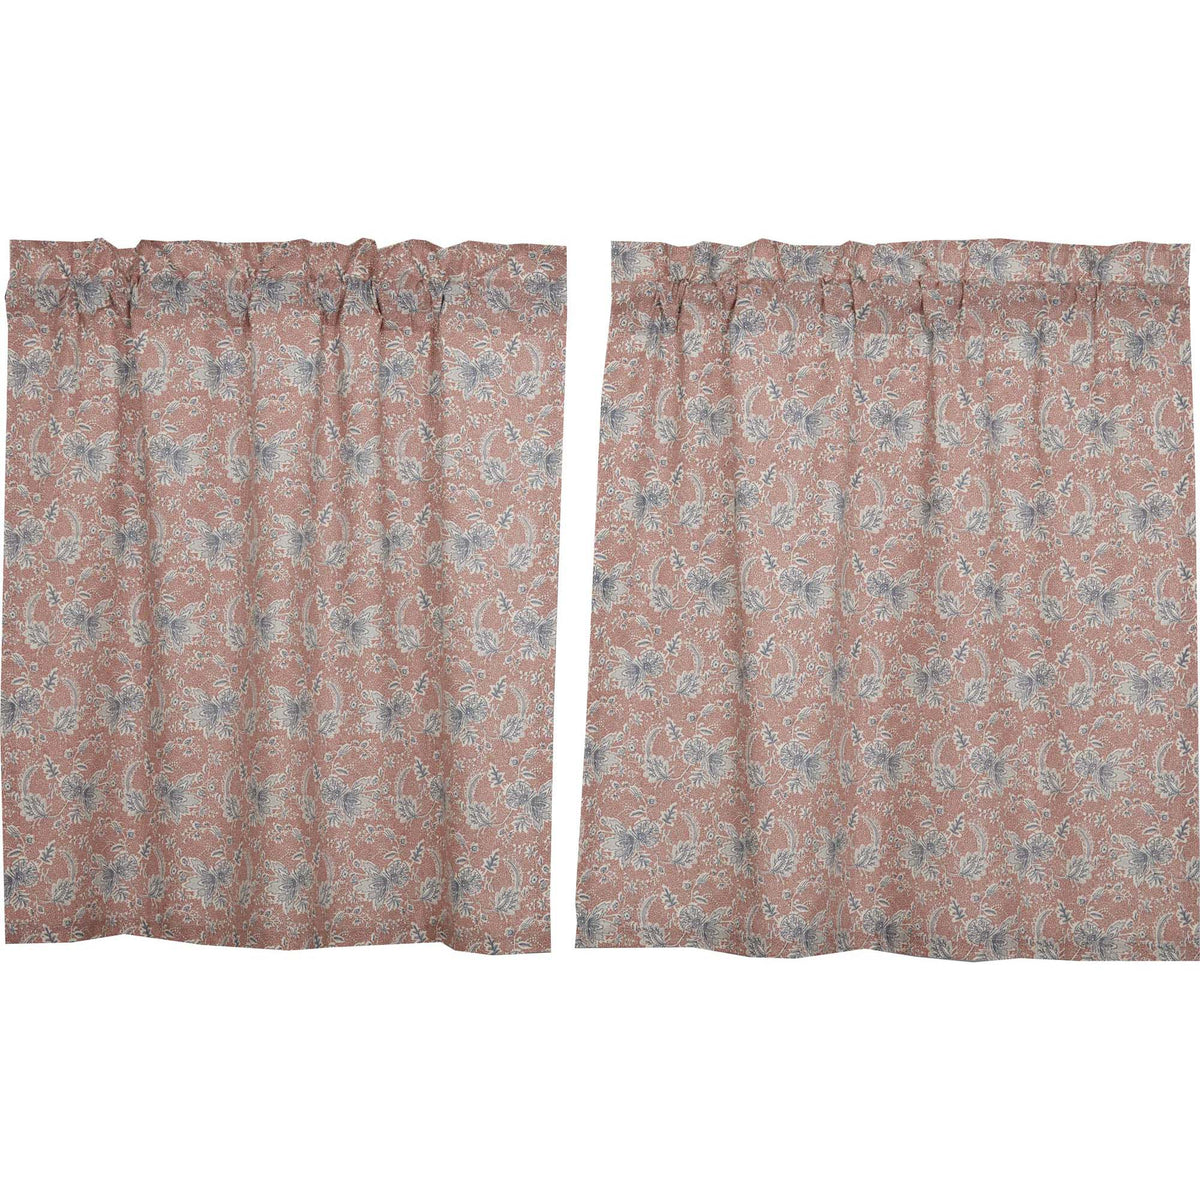 Kaila Floral Tier Set of 2 L36xW36